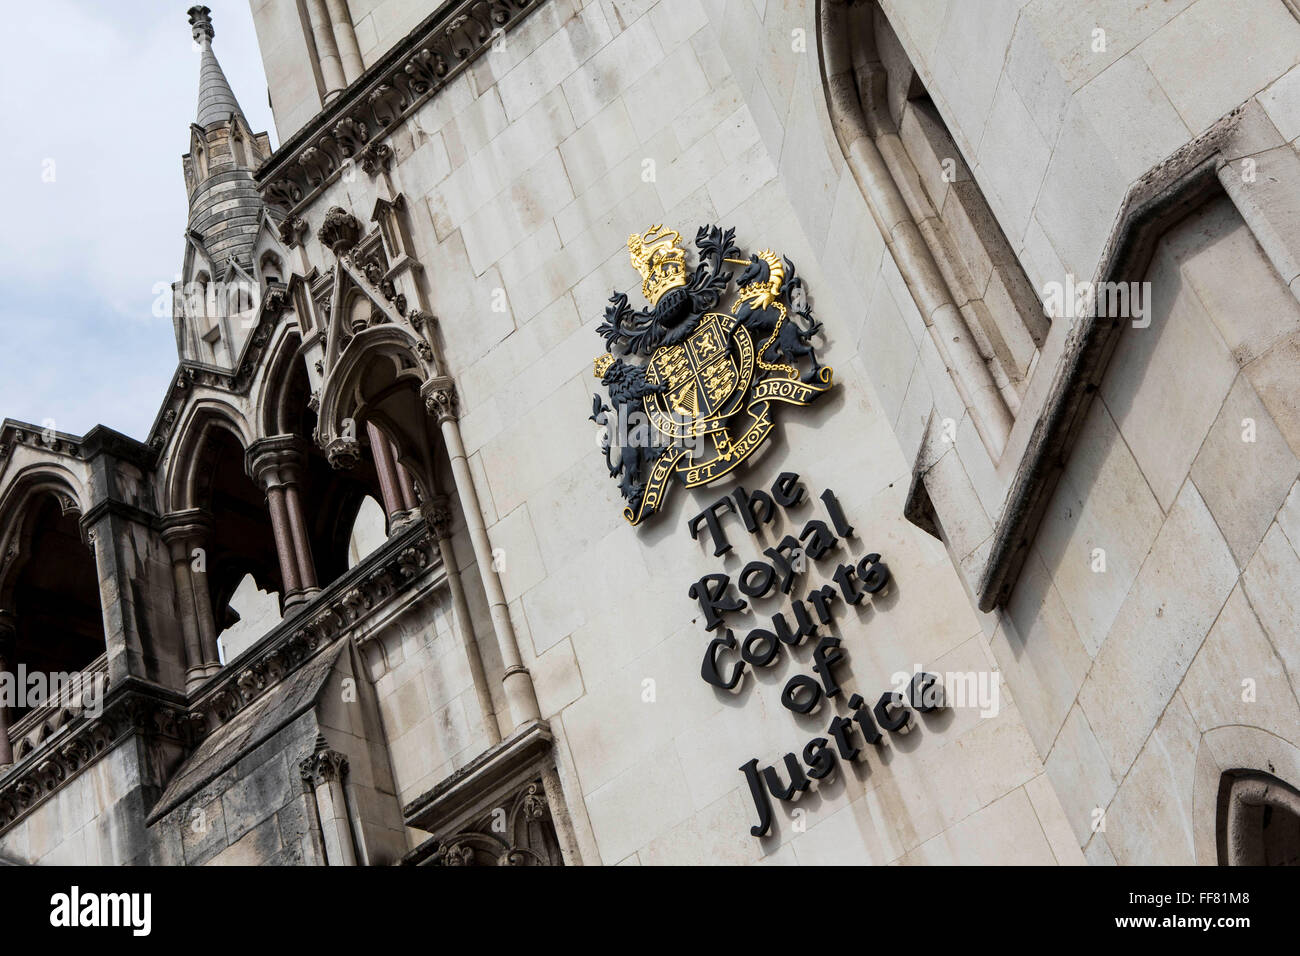 The sign outside The Royal Courts of Justice, commonly called the Law Courts, is a court building in London which houses both the High Court and Court of Appeal of England and Wales. London, UK. Stock Photo